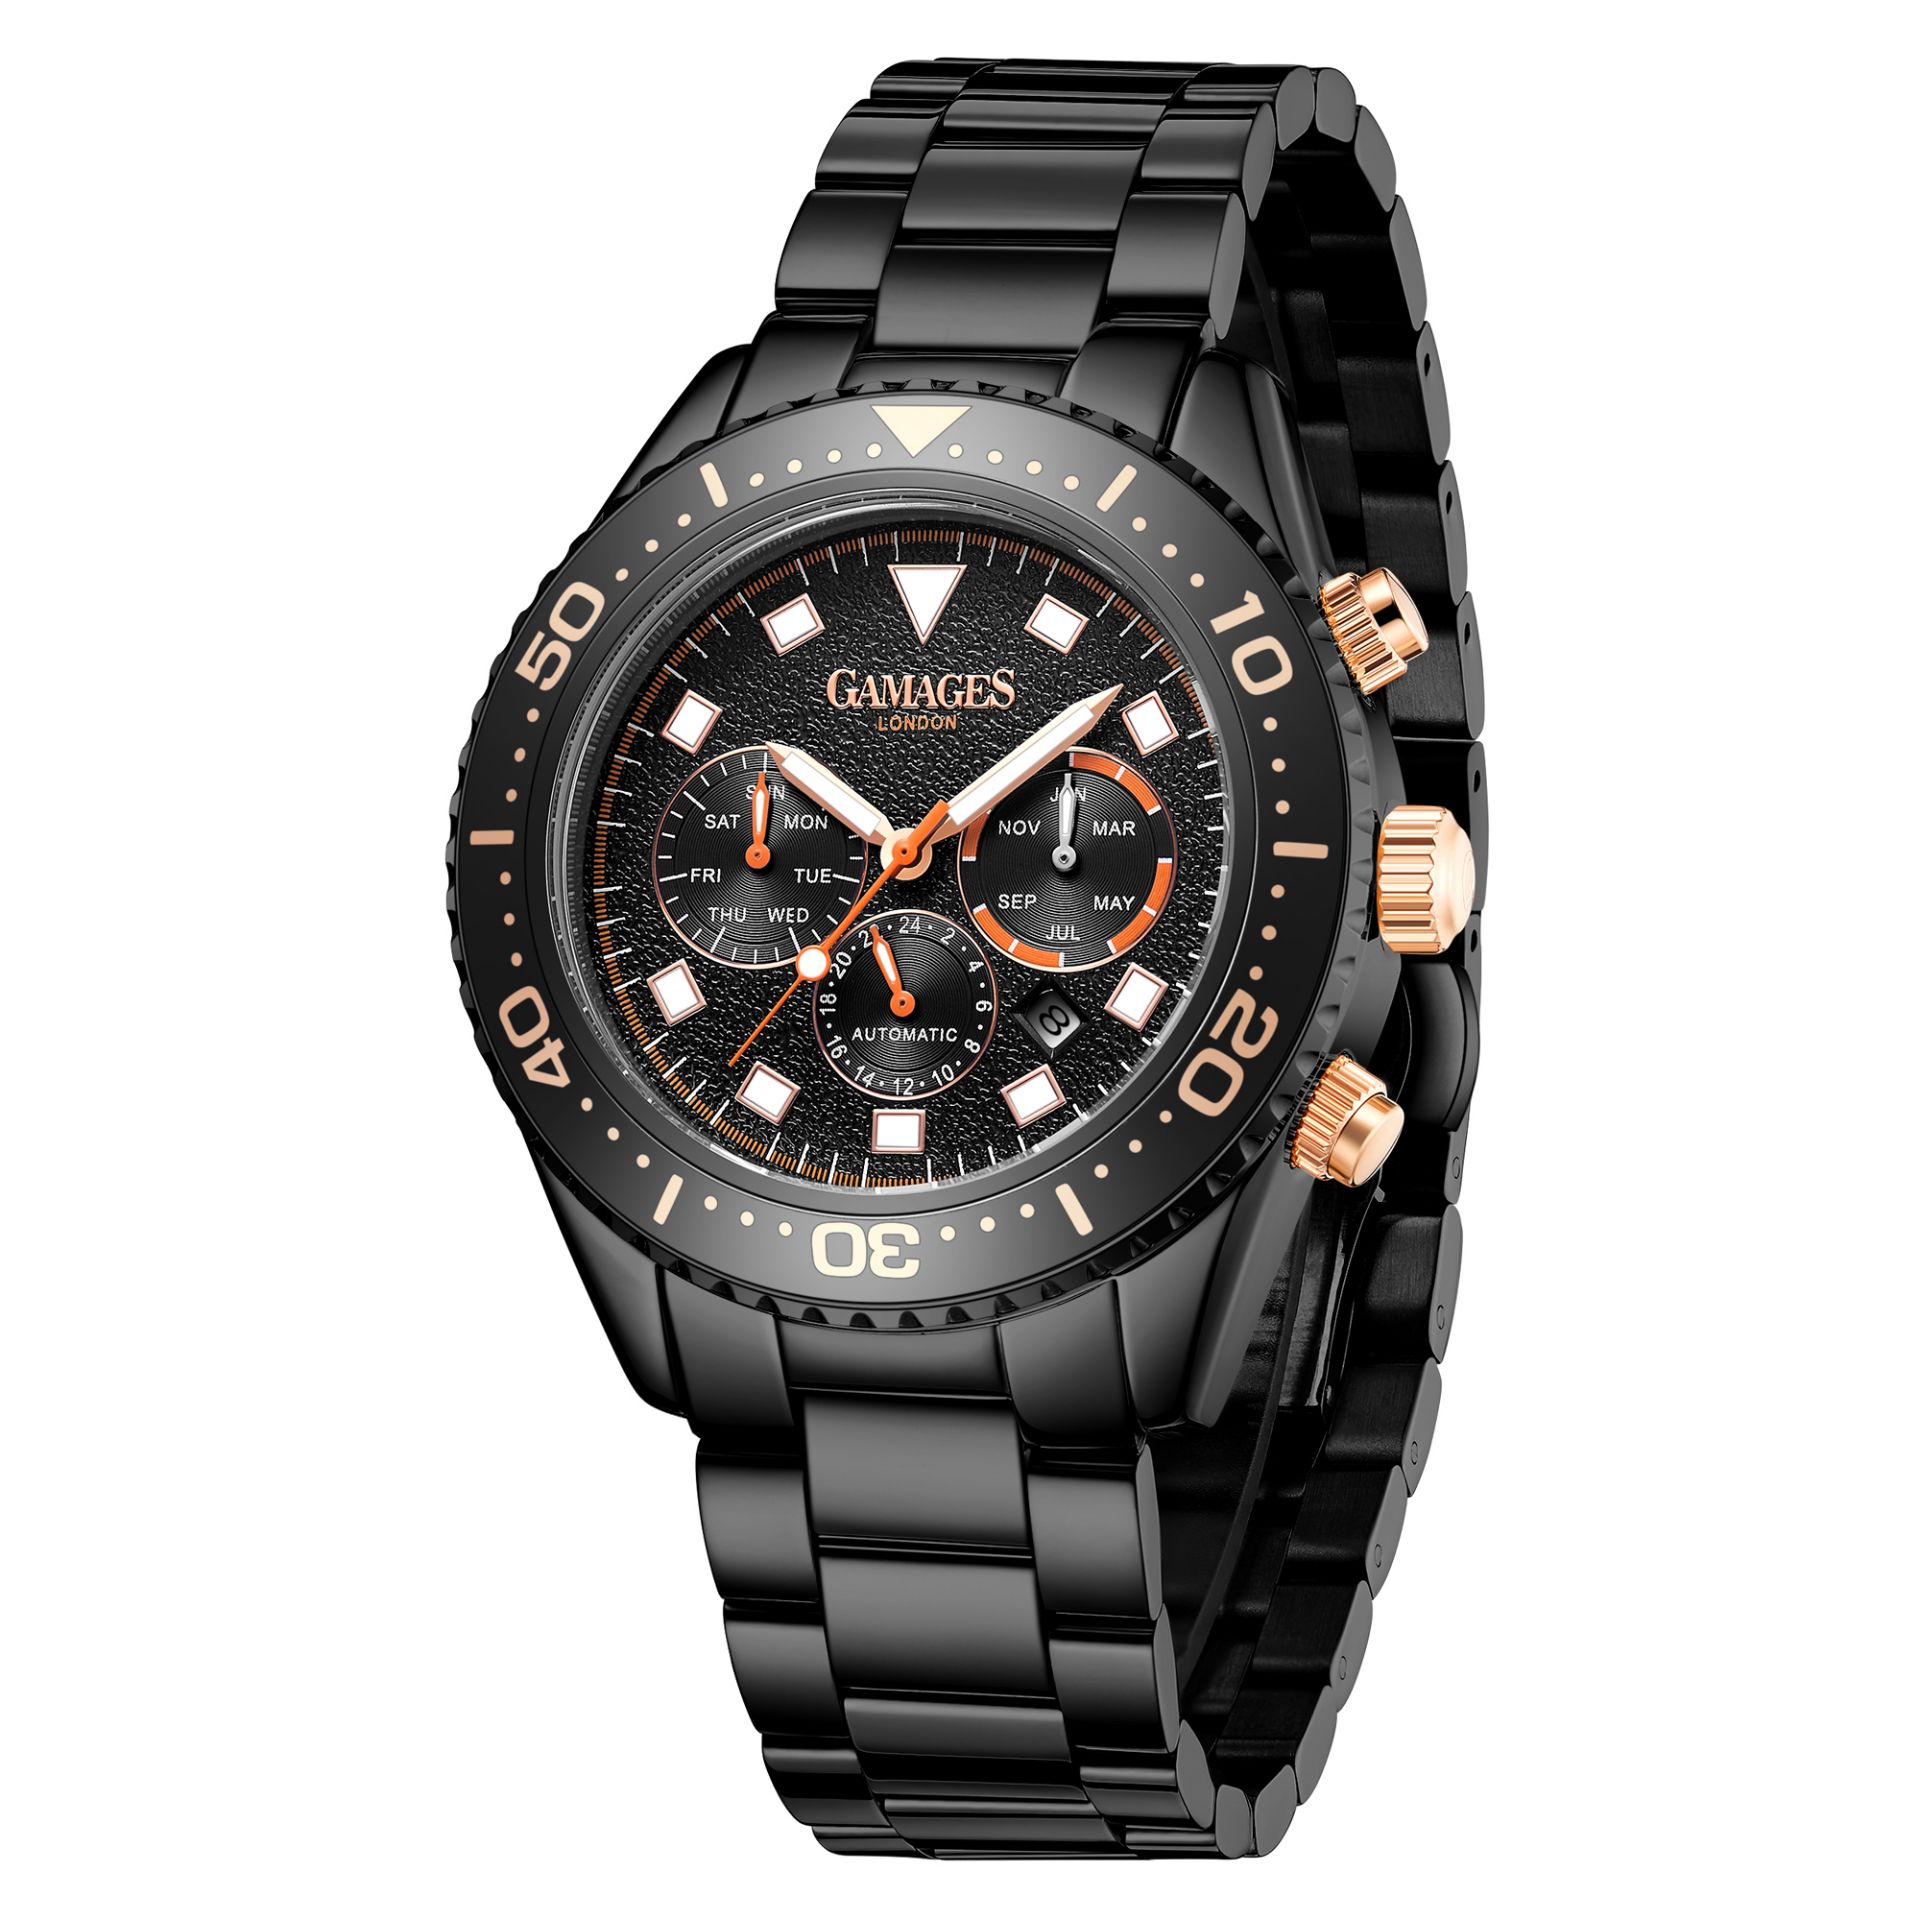 Limited Edition Hand Assembled Gamages Allure Automatic Black - 5 Year Warranty & Free Delivery - Image 2 of 4